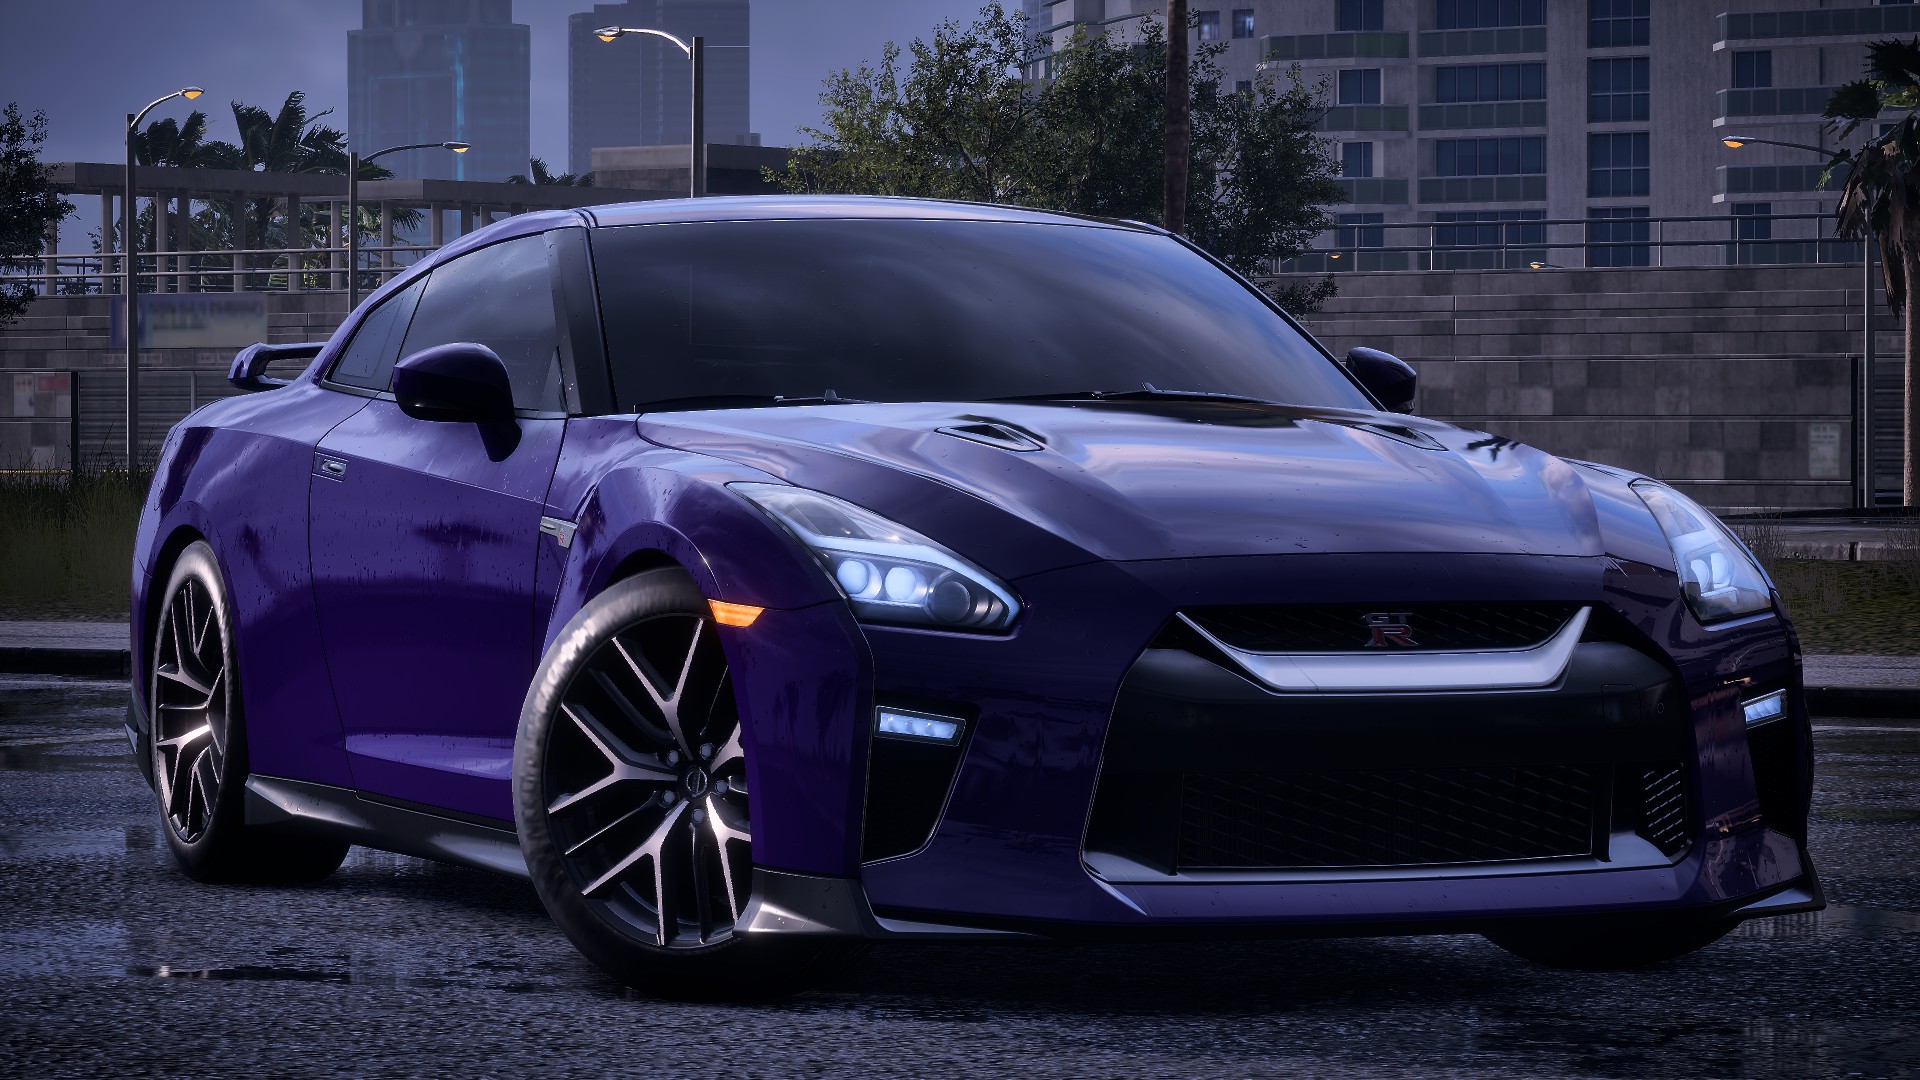 Nissan Nissan GT R NiSMO Car 4K Need For Speed Heat Purple Japanese Cars Street View City 1920x1080